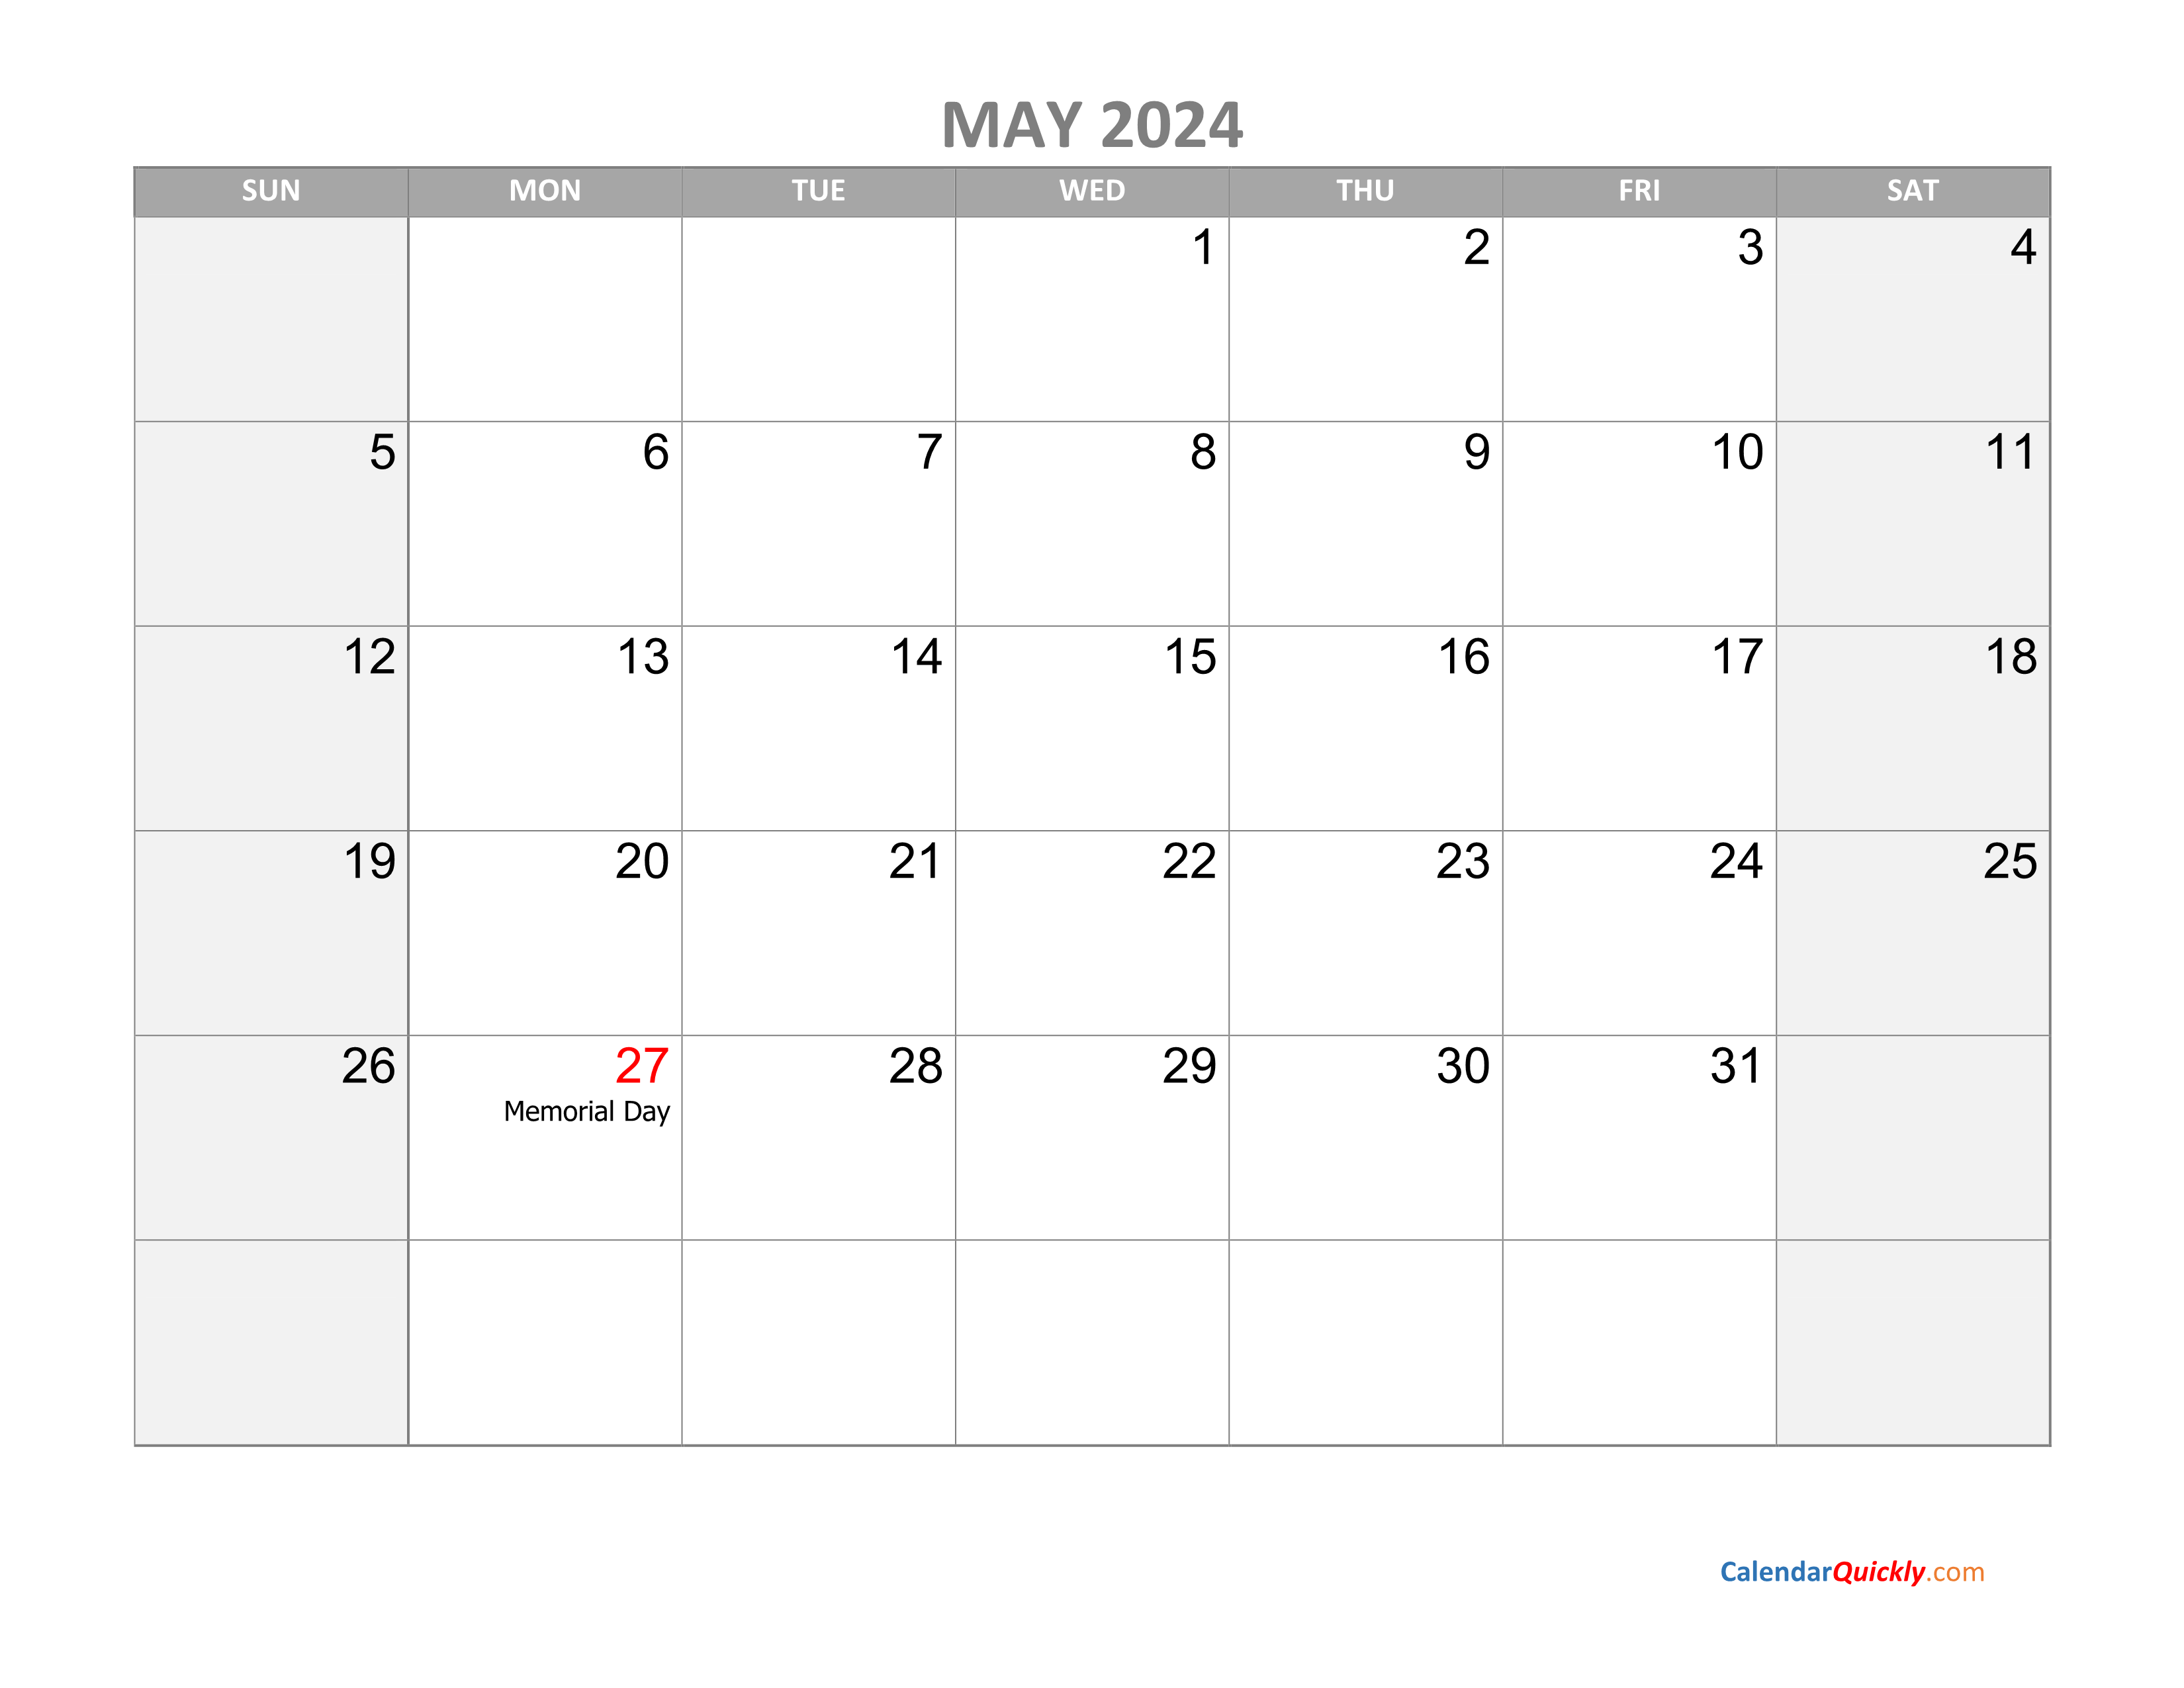 May Calendar 2024 with Holidays Calendar Quickly